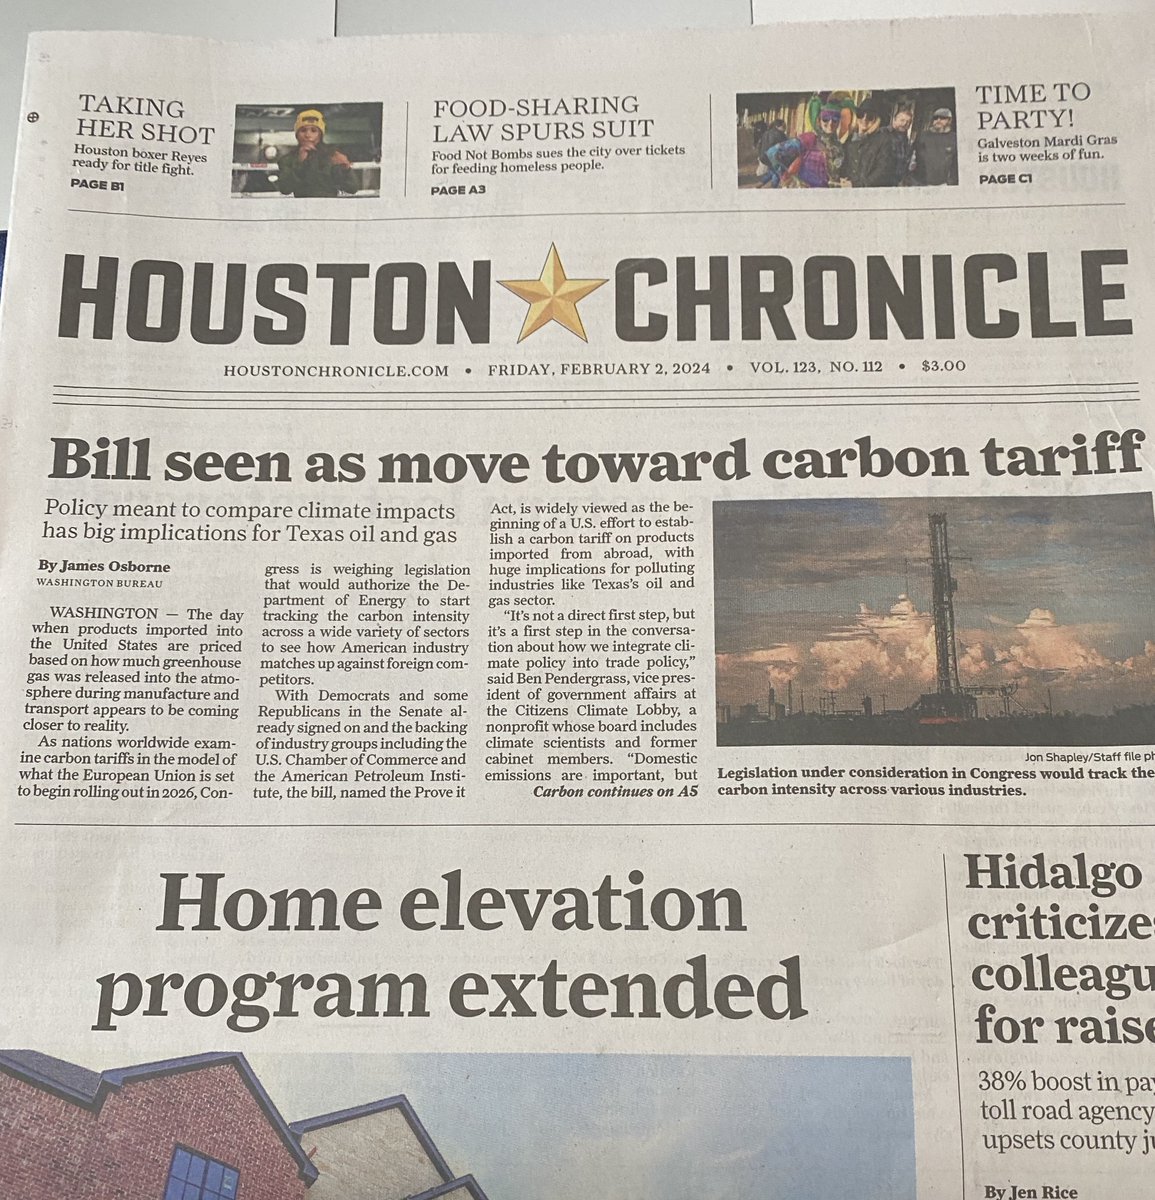 Spotted the #PROVEITAct on the front page of @HoustonChron! 'Domestic emissions are important, but this is a global problem,' said CCL's VP of Government Affairs Ben Pendergrass. 'We need to think about emissions globally, in particular major emitters like China and India.”